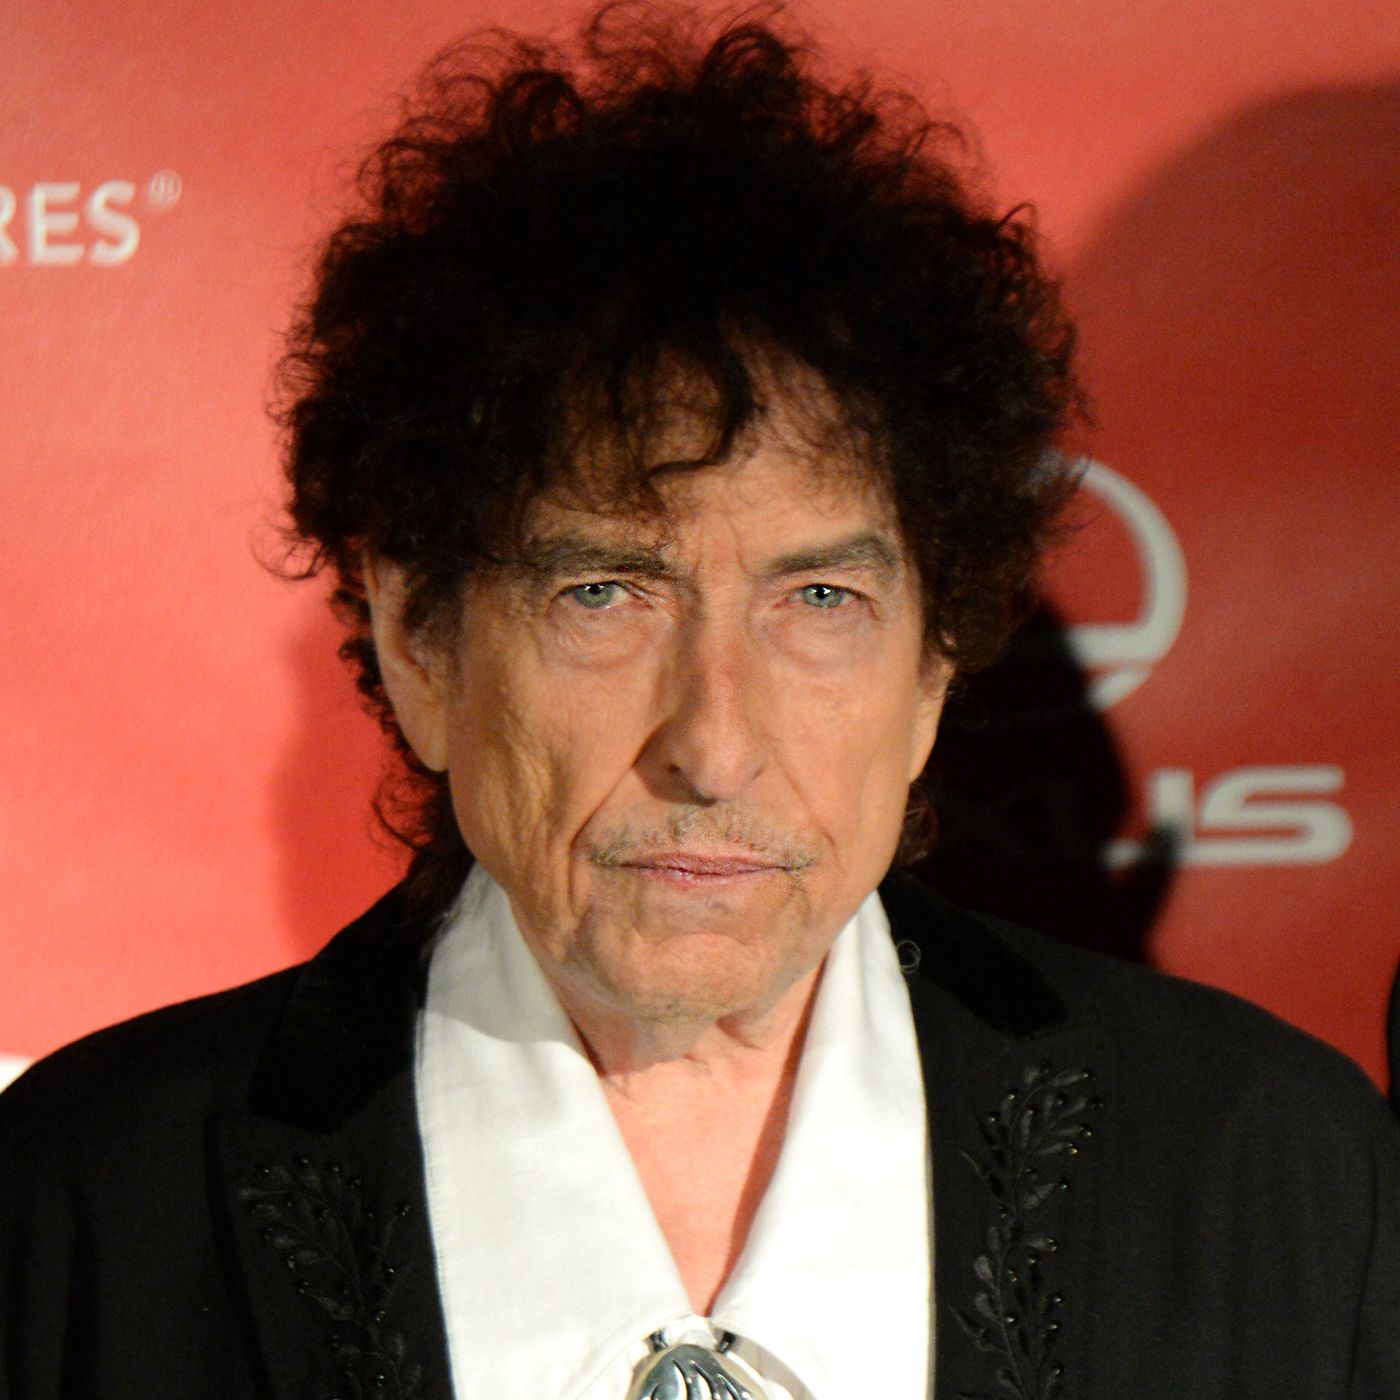 Bob Dylan Apologizes for Book-Signing Controversy